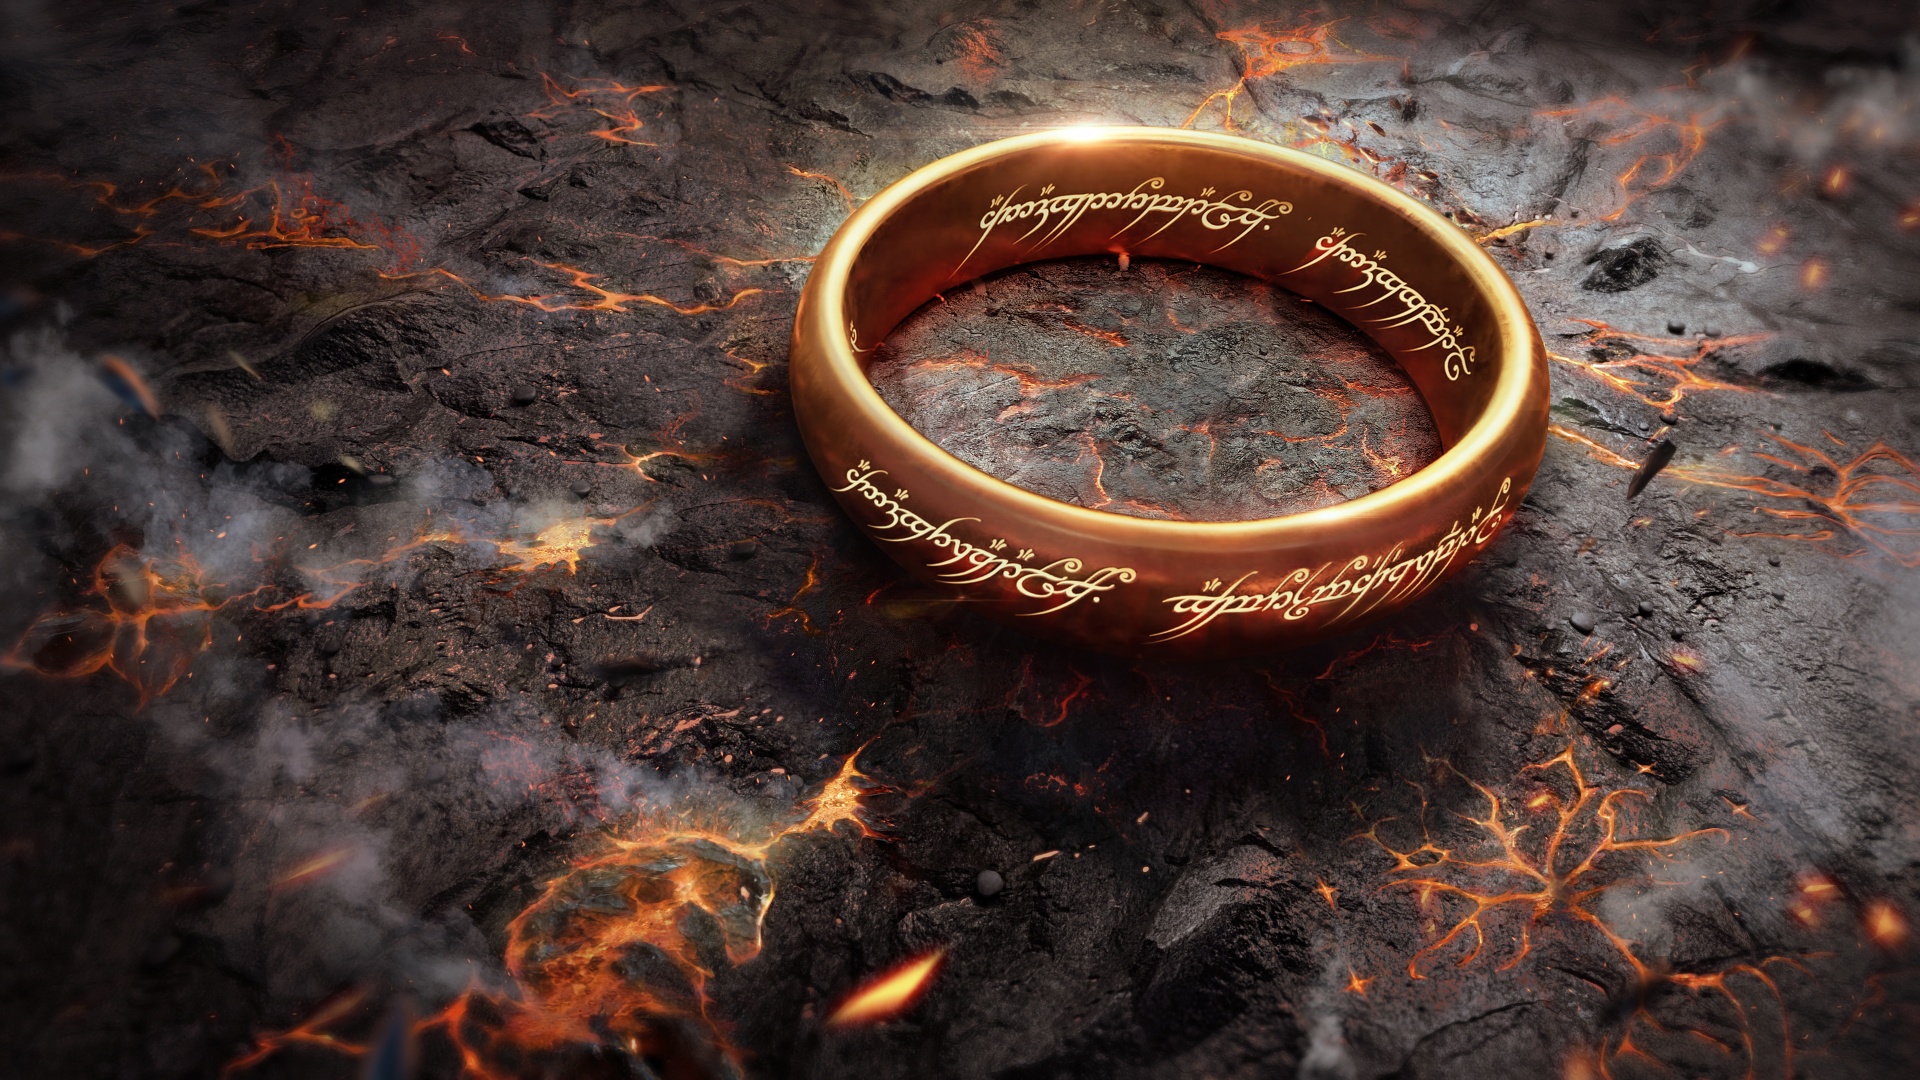 The Lord of the Rings Fantasy Art 2K wallpaper download